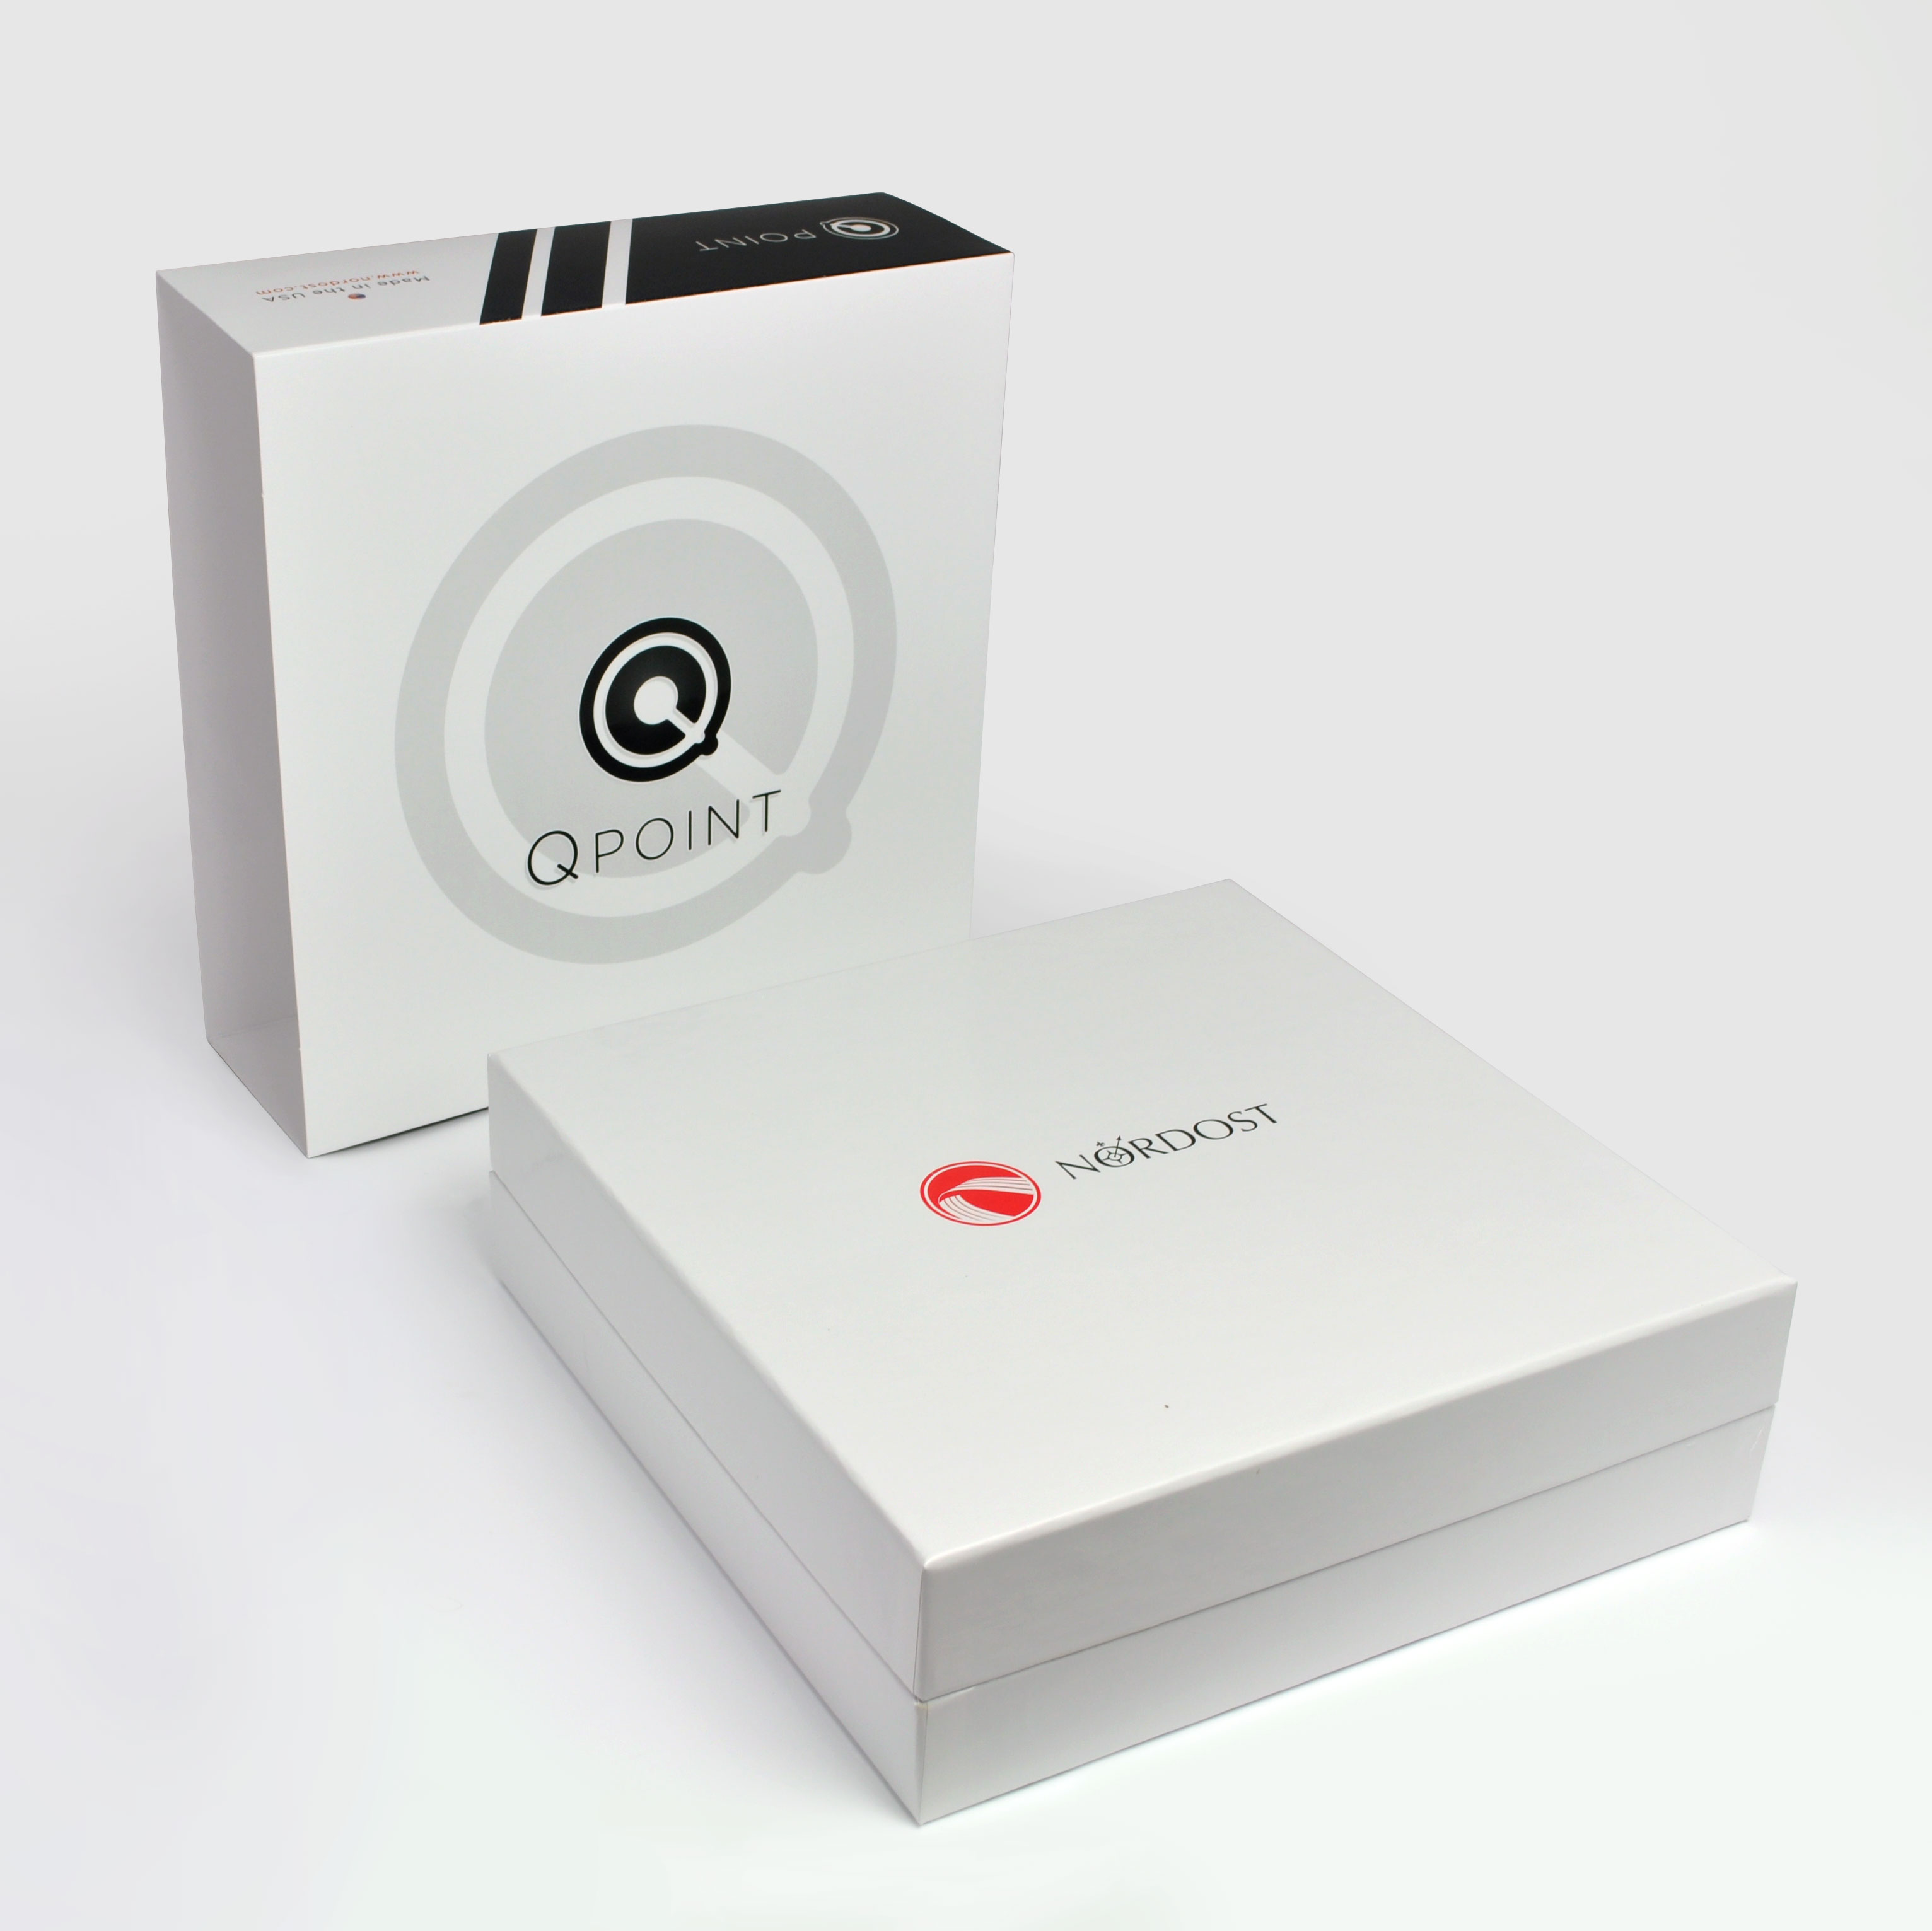 <p align="center">QPOINT Box and Sleeve</p>